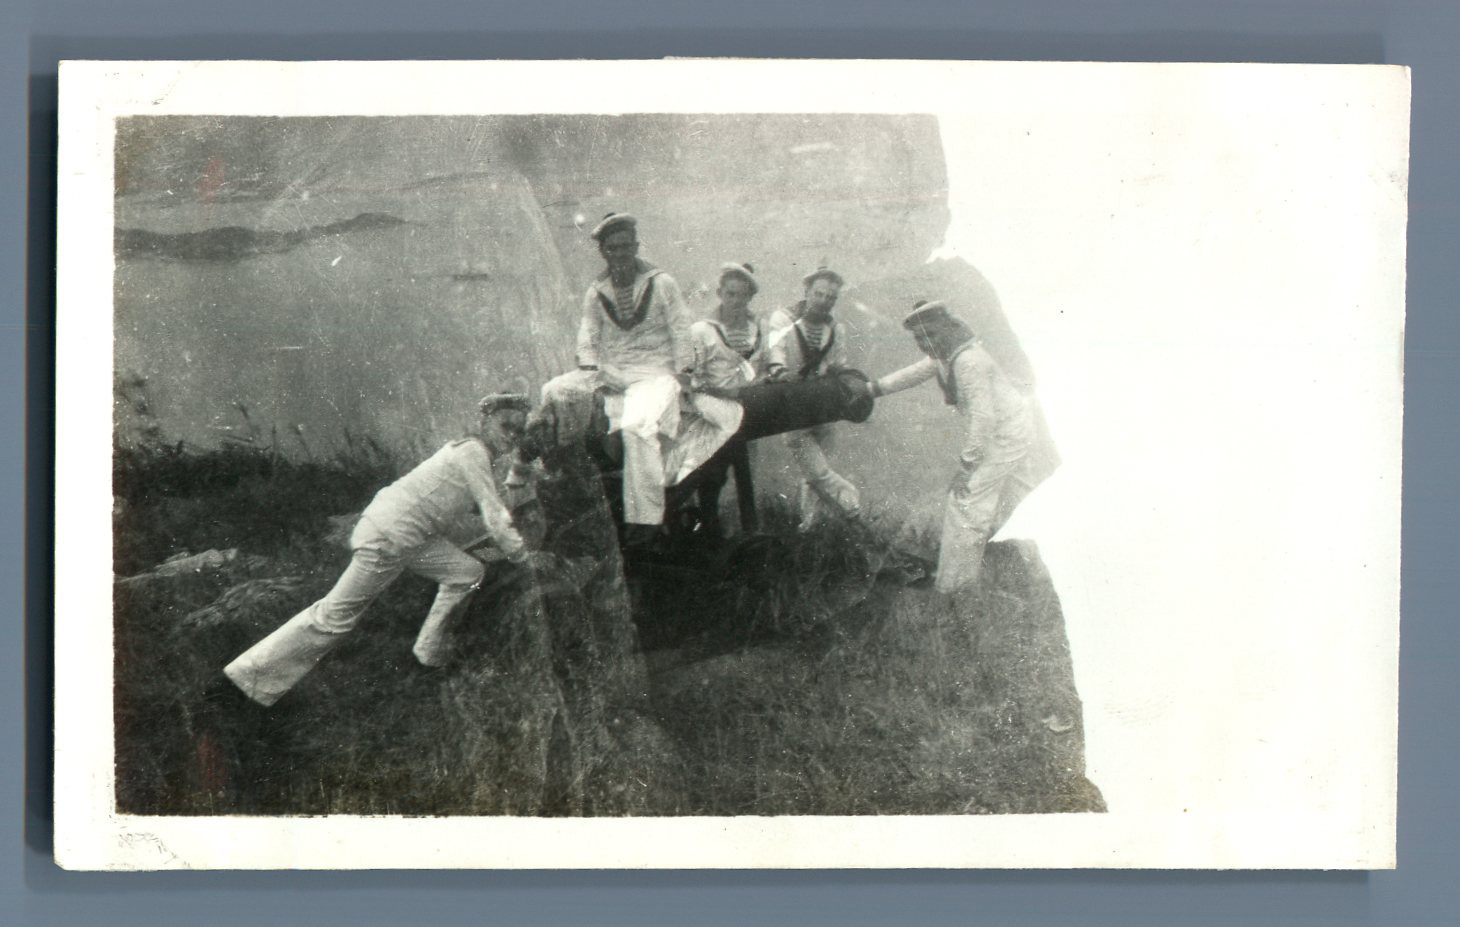 China, French Sailors Posing with an Antique Cannon Vintage Silver Print. Chin